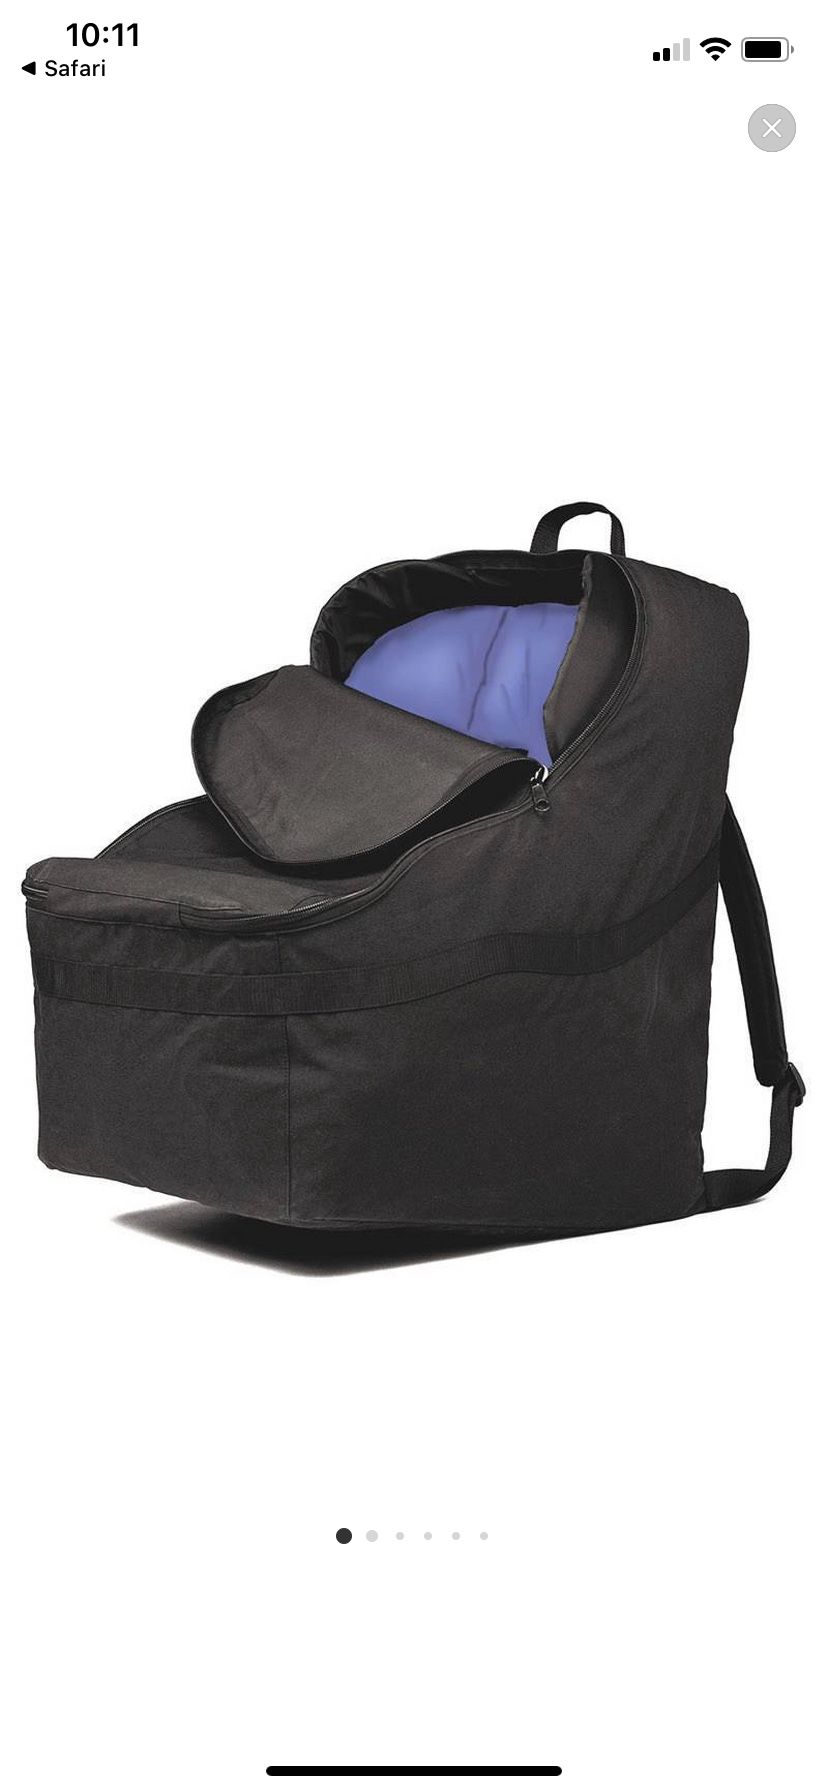 Car seat backpack for traveling •NEW•